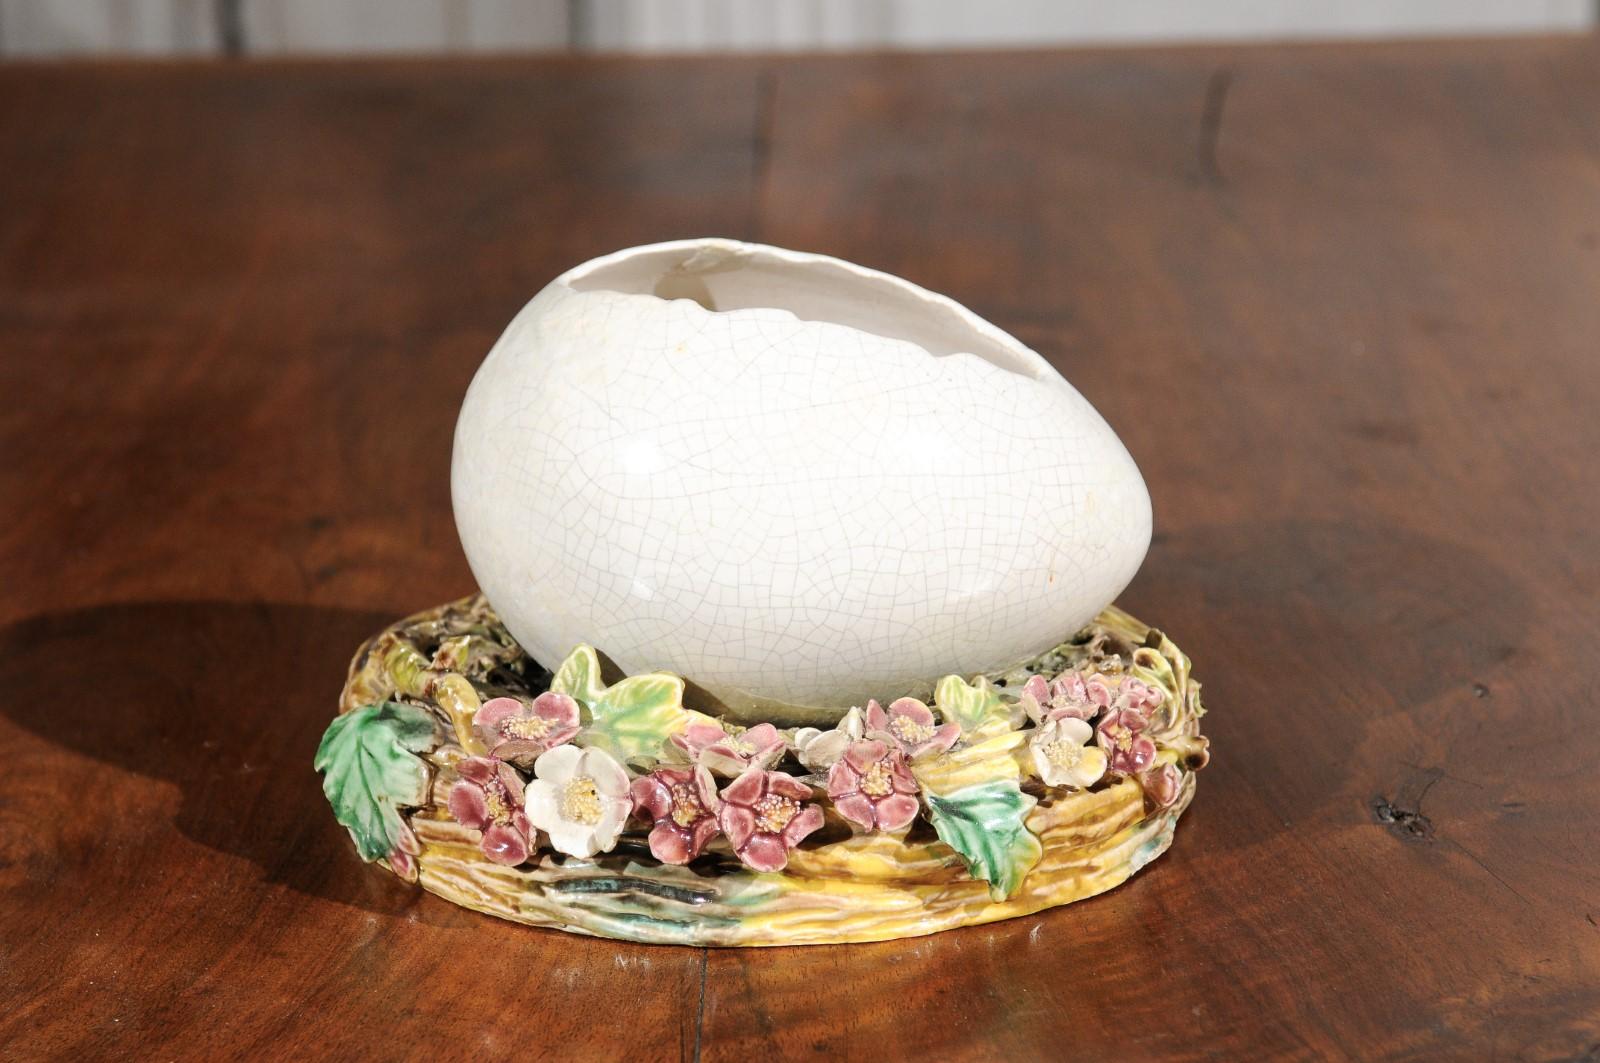 A French barbotine majolica egg from the late 19th century, with floral motifs. Born in France during the Belle-Époque era, this majolica egg features an exquisite barbotine décor depicting pastel flowers and foliage presenting red, green, yellow